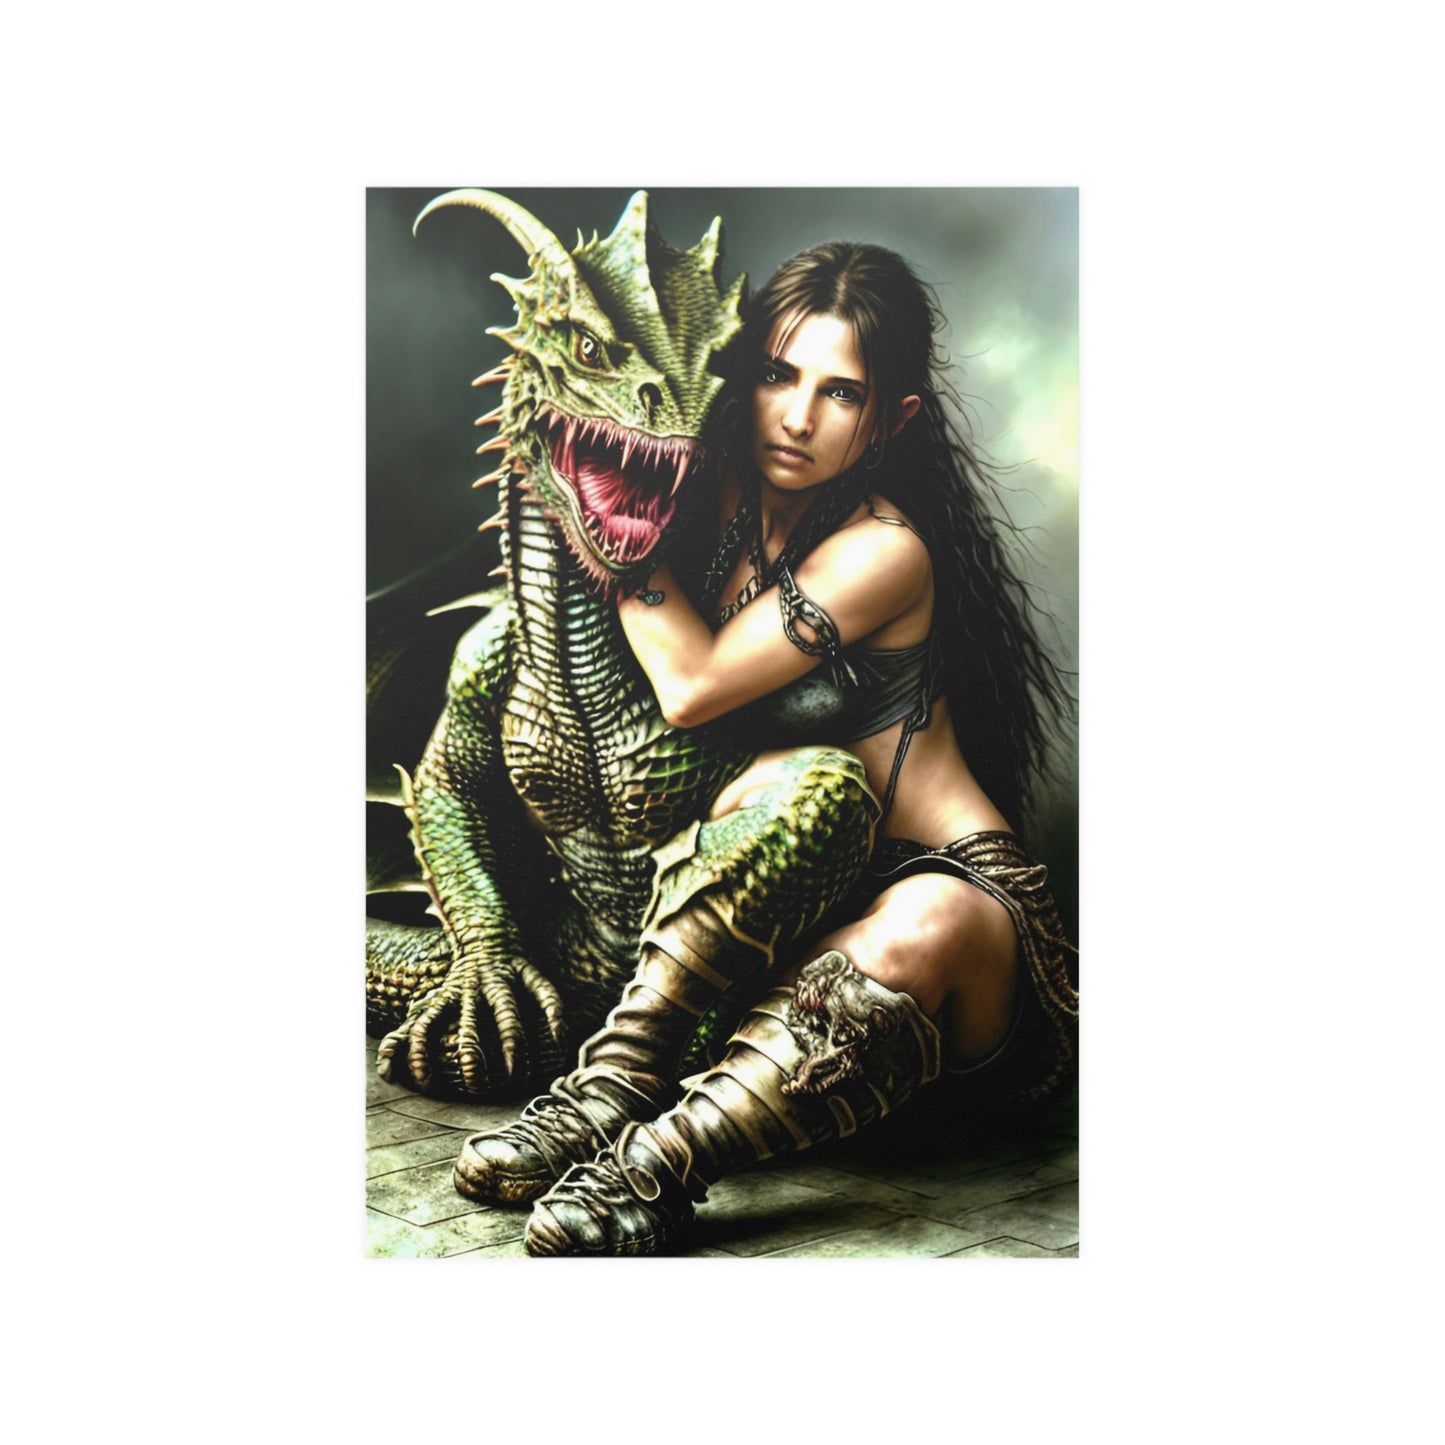 Baby dragon 21 Satin Posters (210gsm)